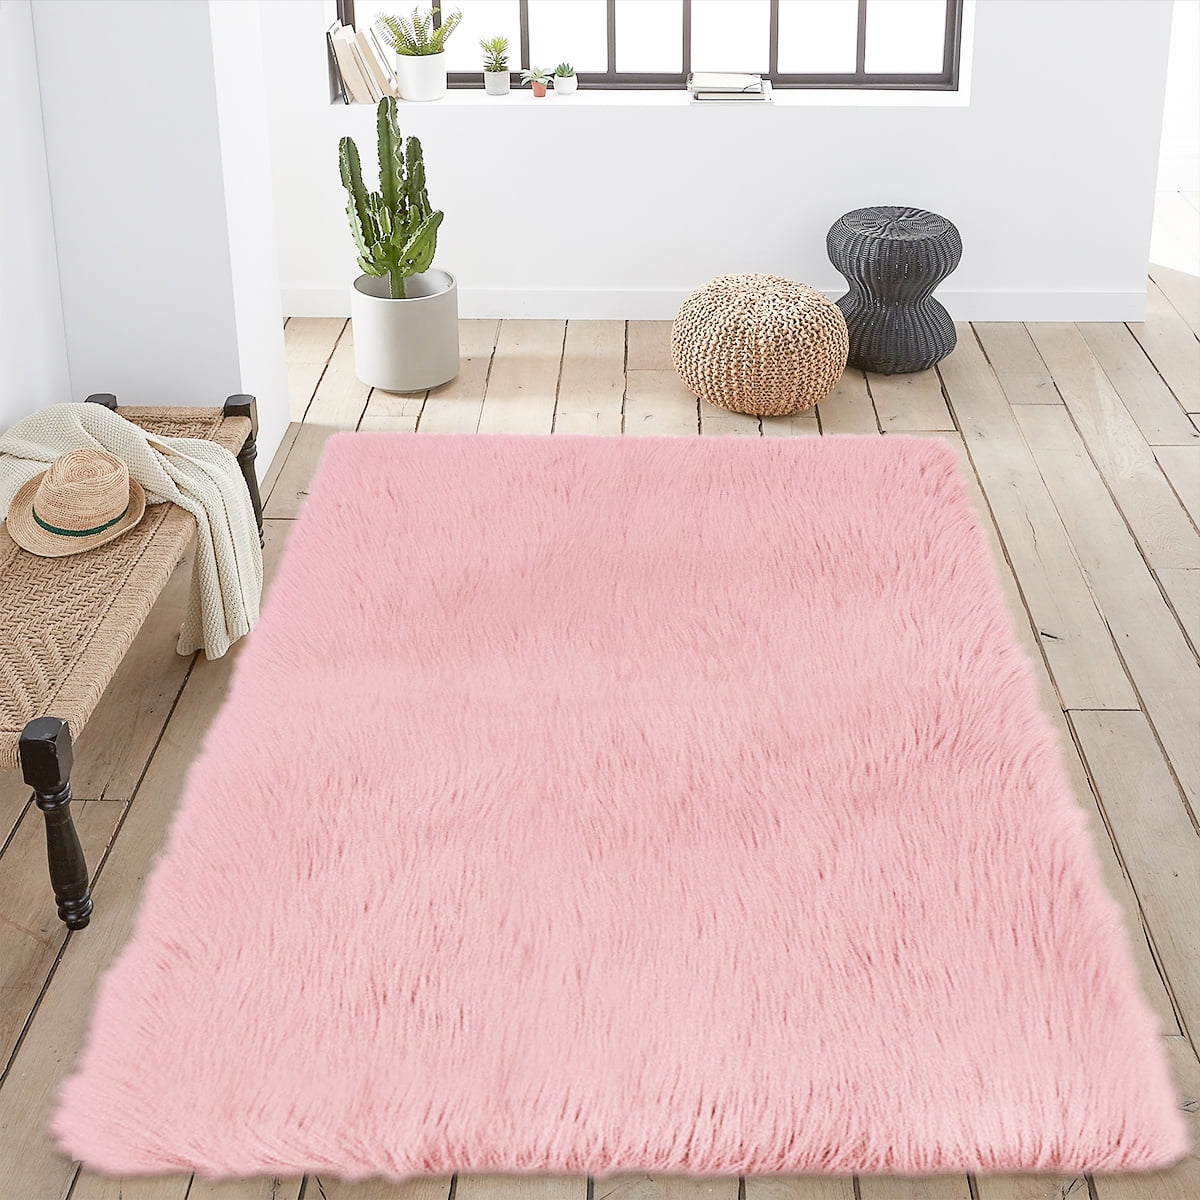 Details about   Fluffy Faux Fur Wool Area Rugs Hairy Shaggy Plain Carpet Floor Bedroom Home Mat. 